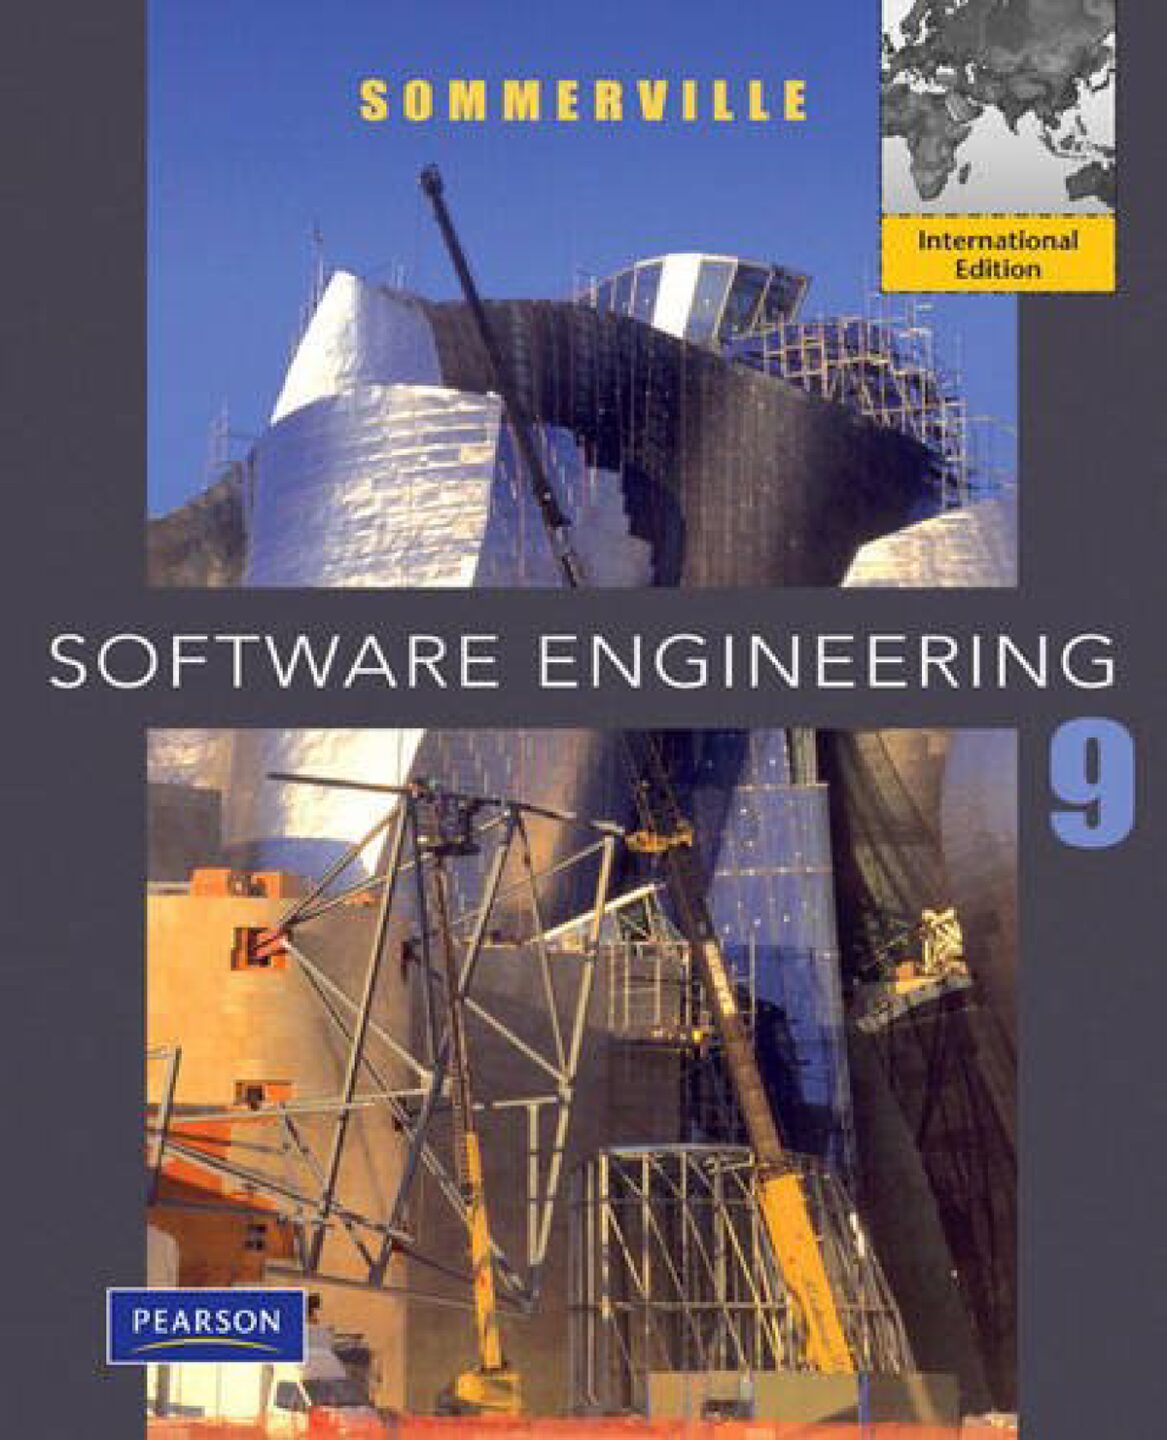 software engineering iam sommerville 9th edition